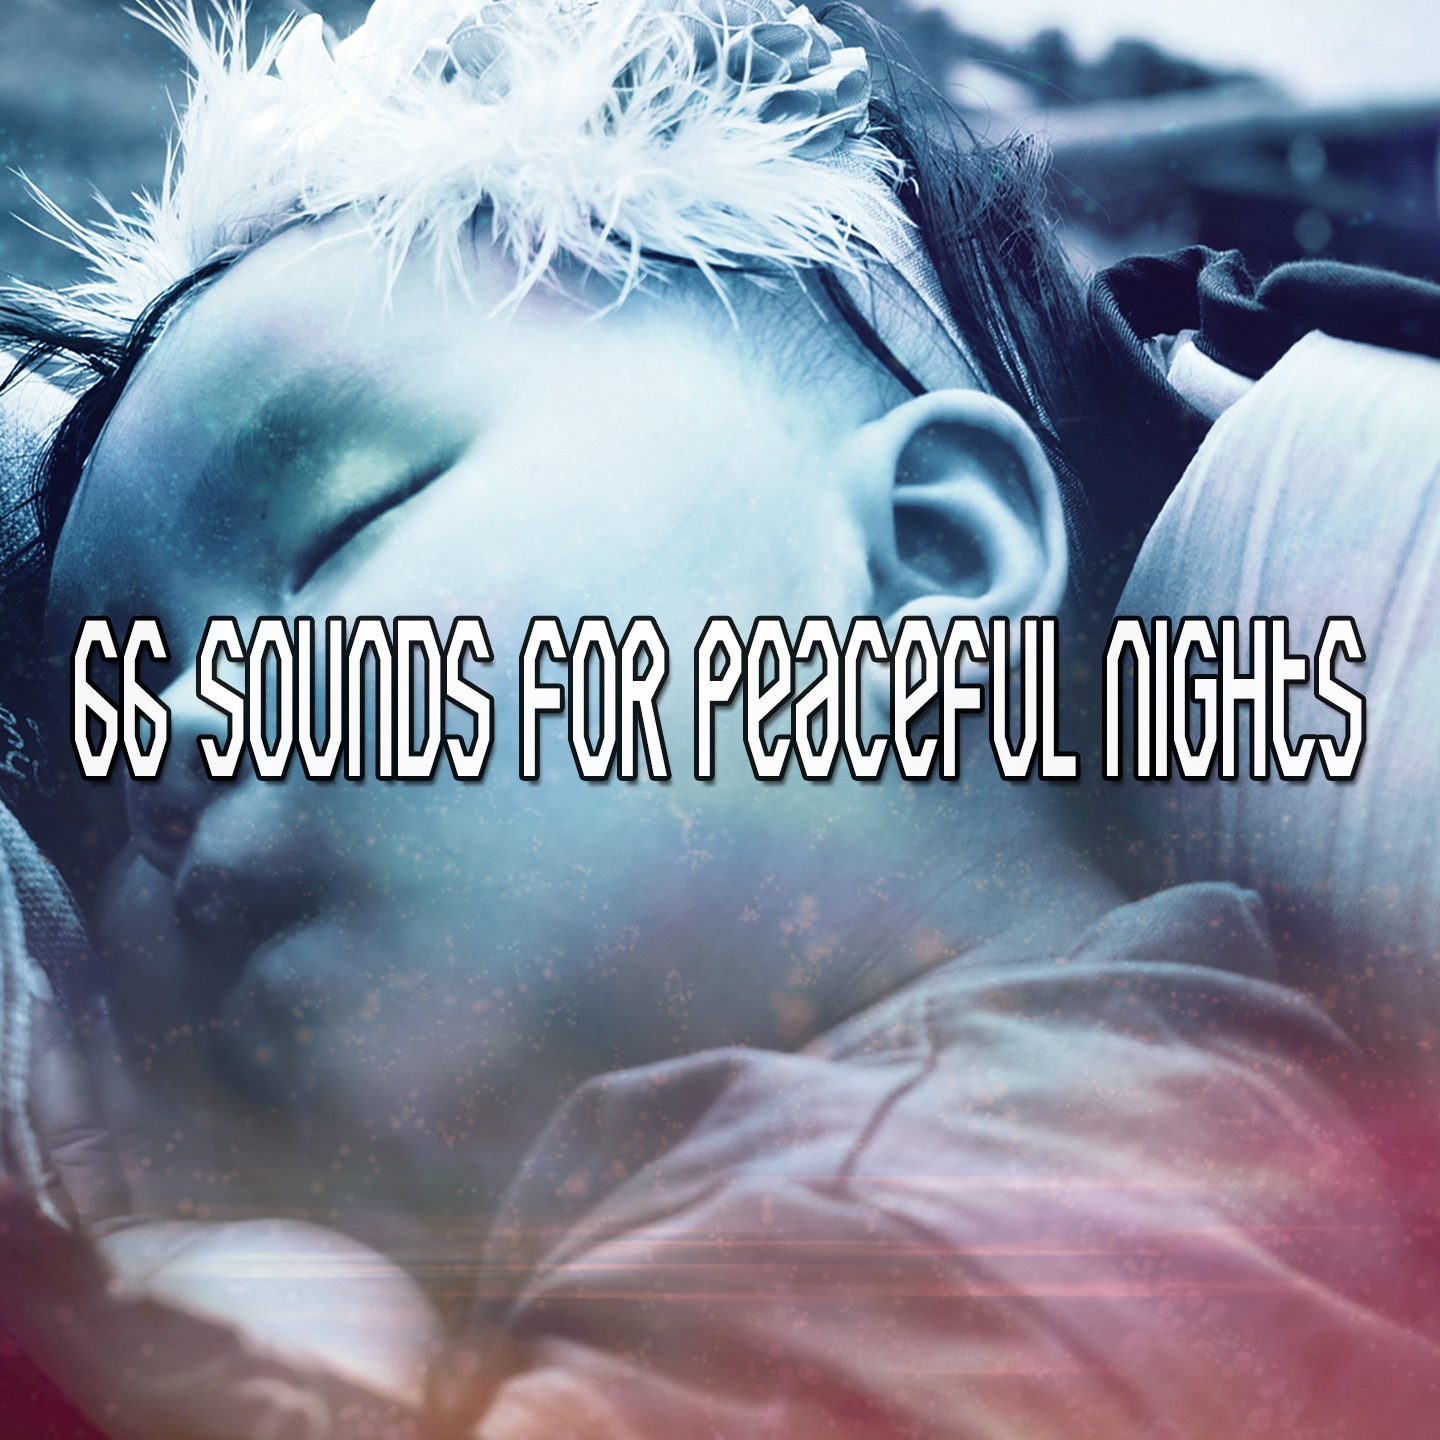 66 Sounds For Peaceful Nights